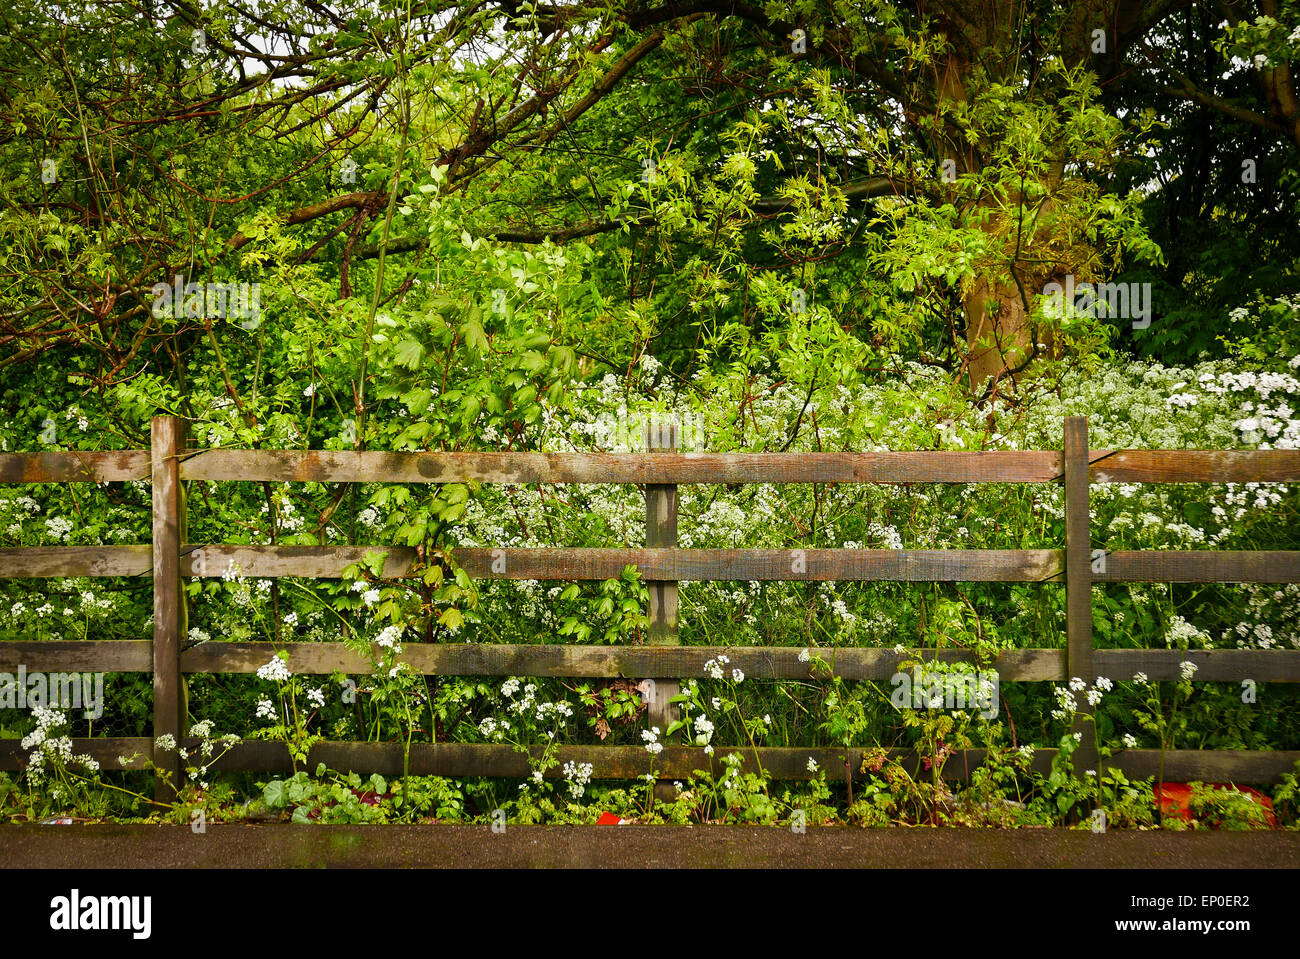 Wooden fence with trees, bushes and wildflowers behind Stock Photo